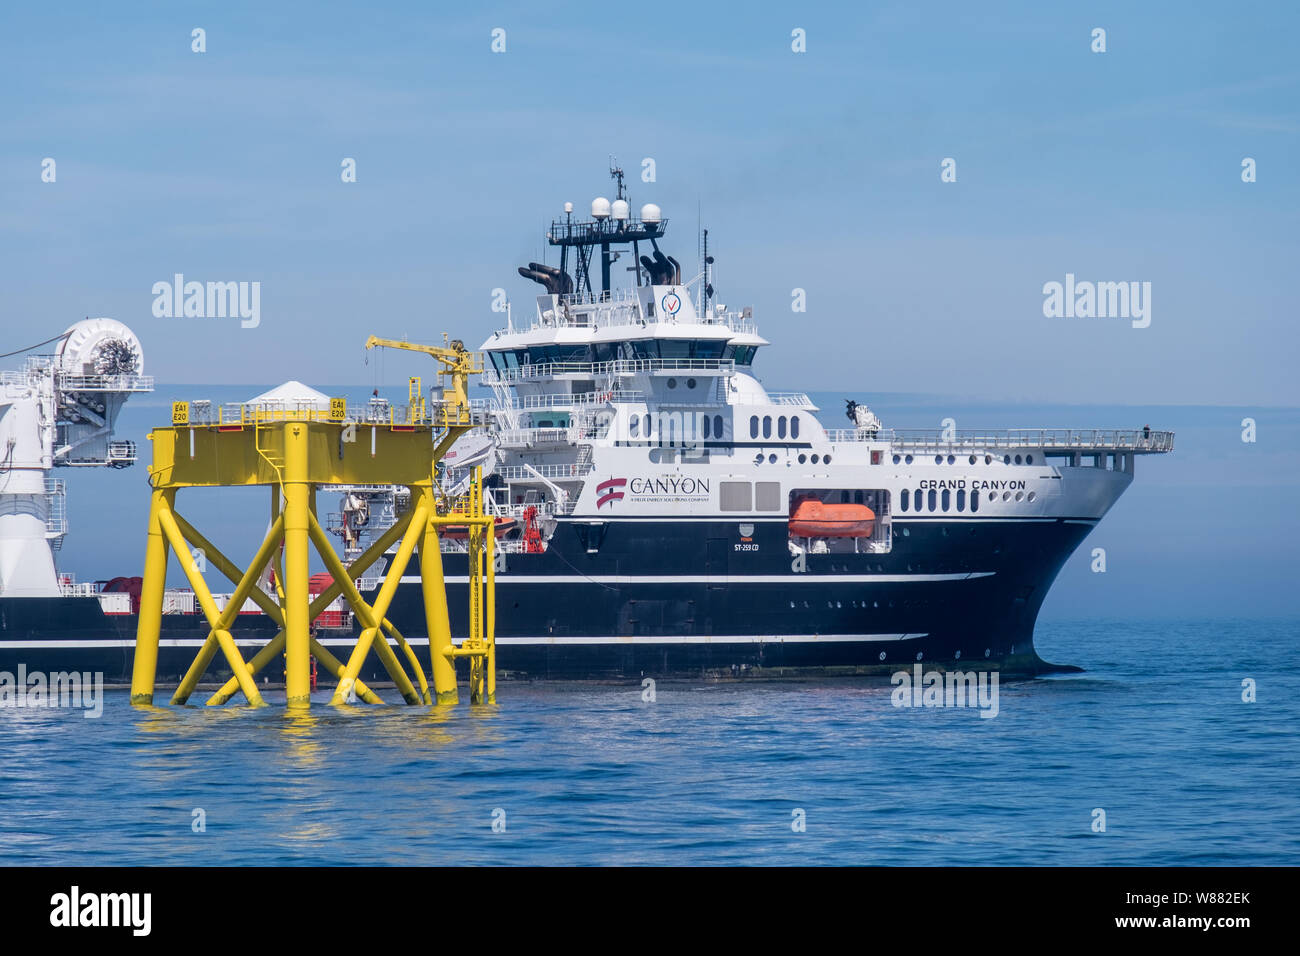 East Anglia ONE Offshore Wind Farm during construction with the construction support vessel, Grand Canyon, working on subsea cables close to one of the wind turbine jacket installations Stock Photo